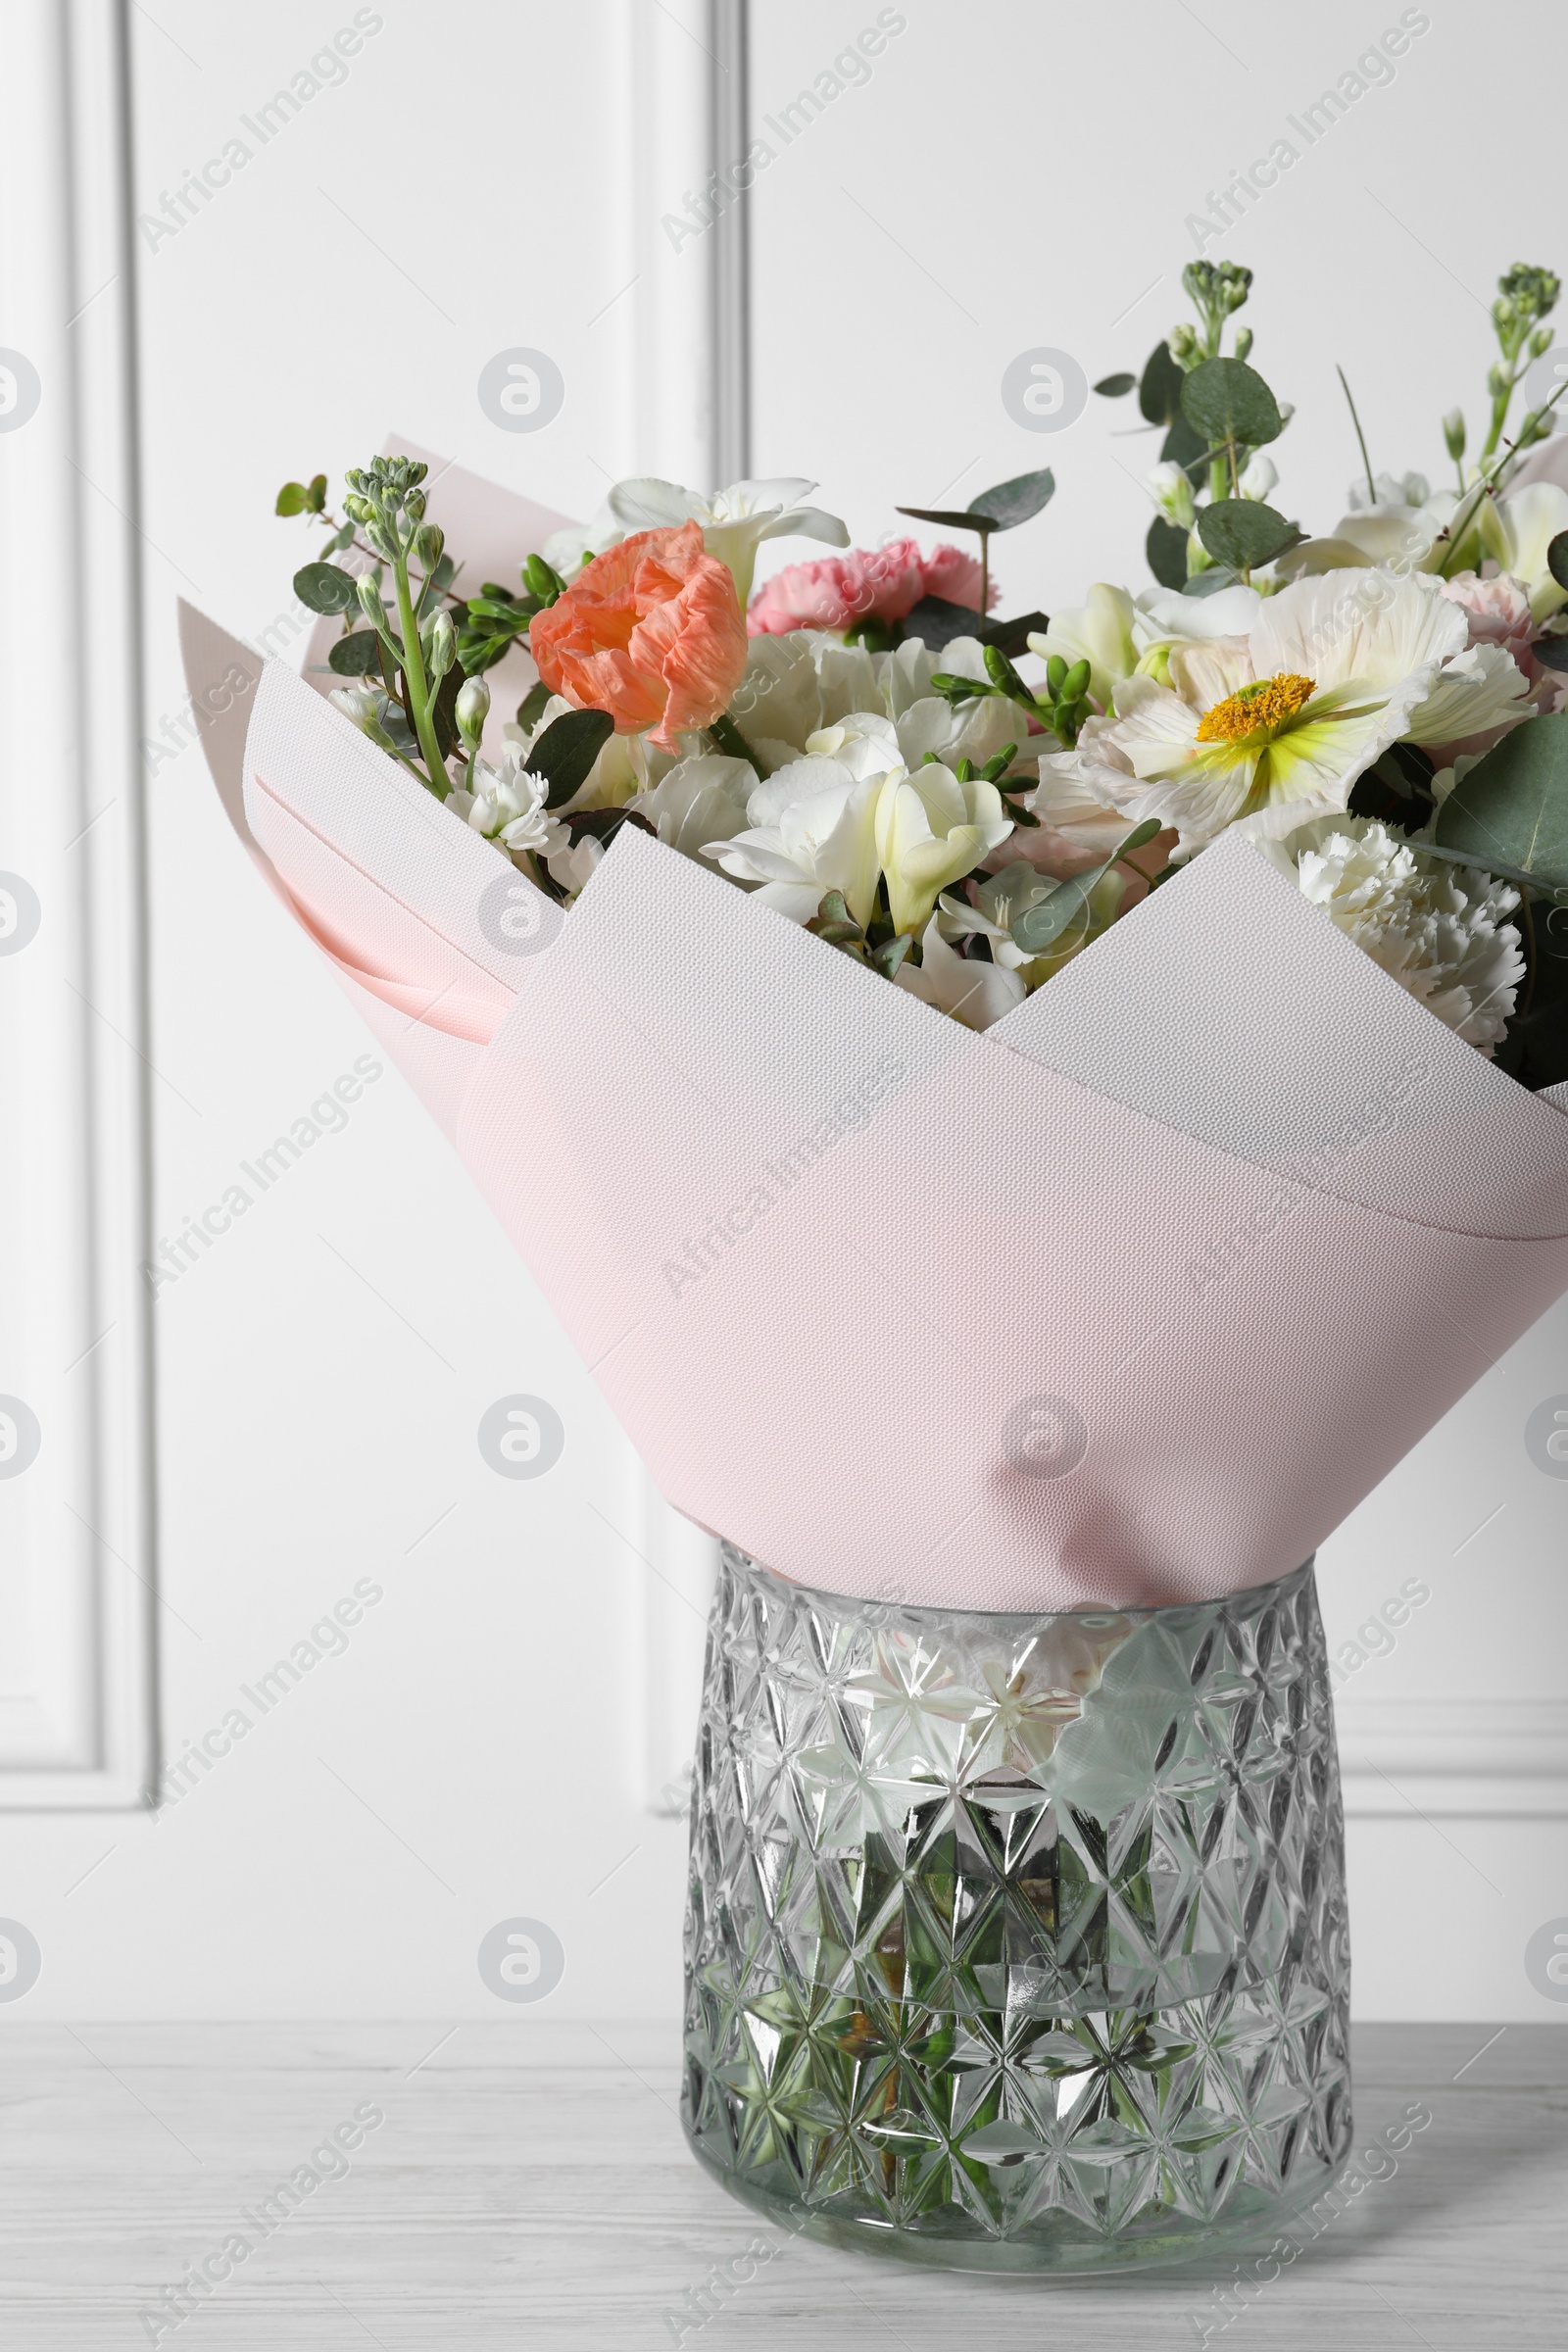 Photo of Bouquet of beautiful flowers in vase on wooden table against white wall